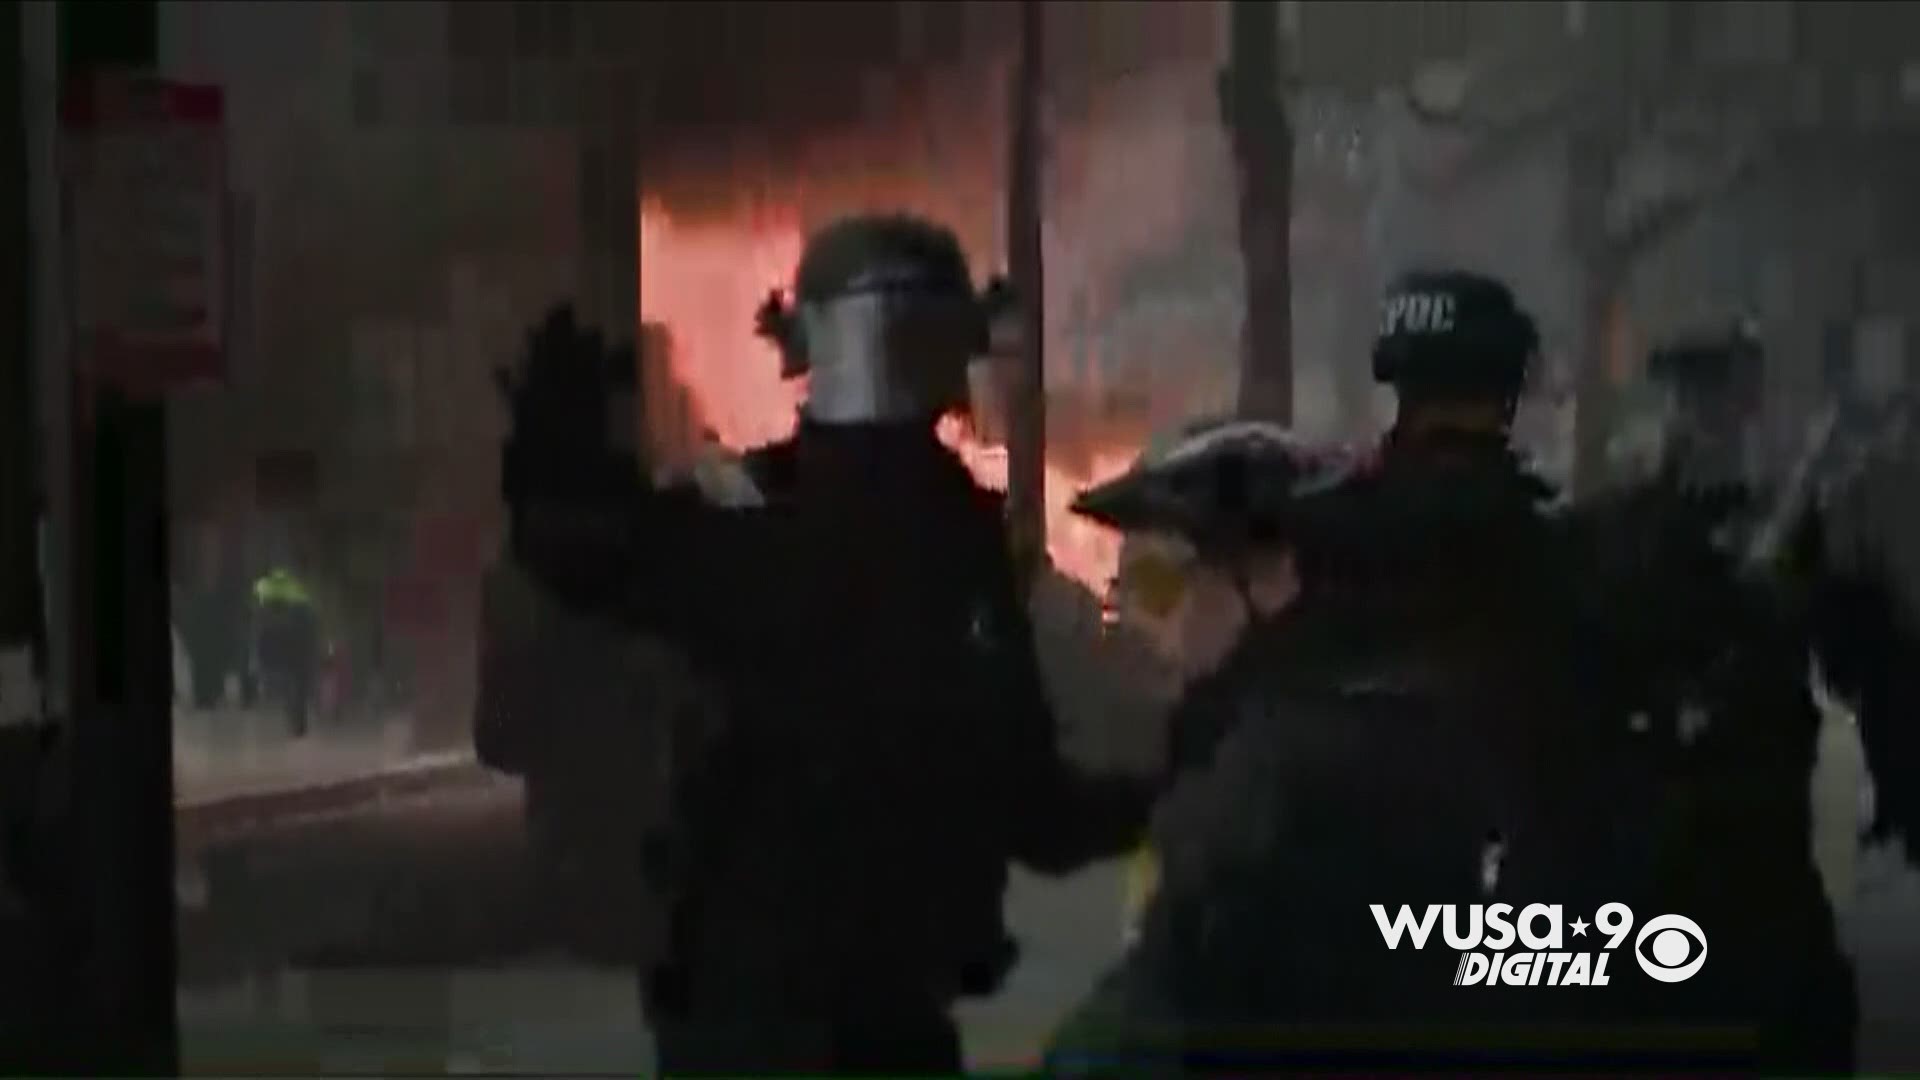 Limo set on fire near protests on K Street